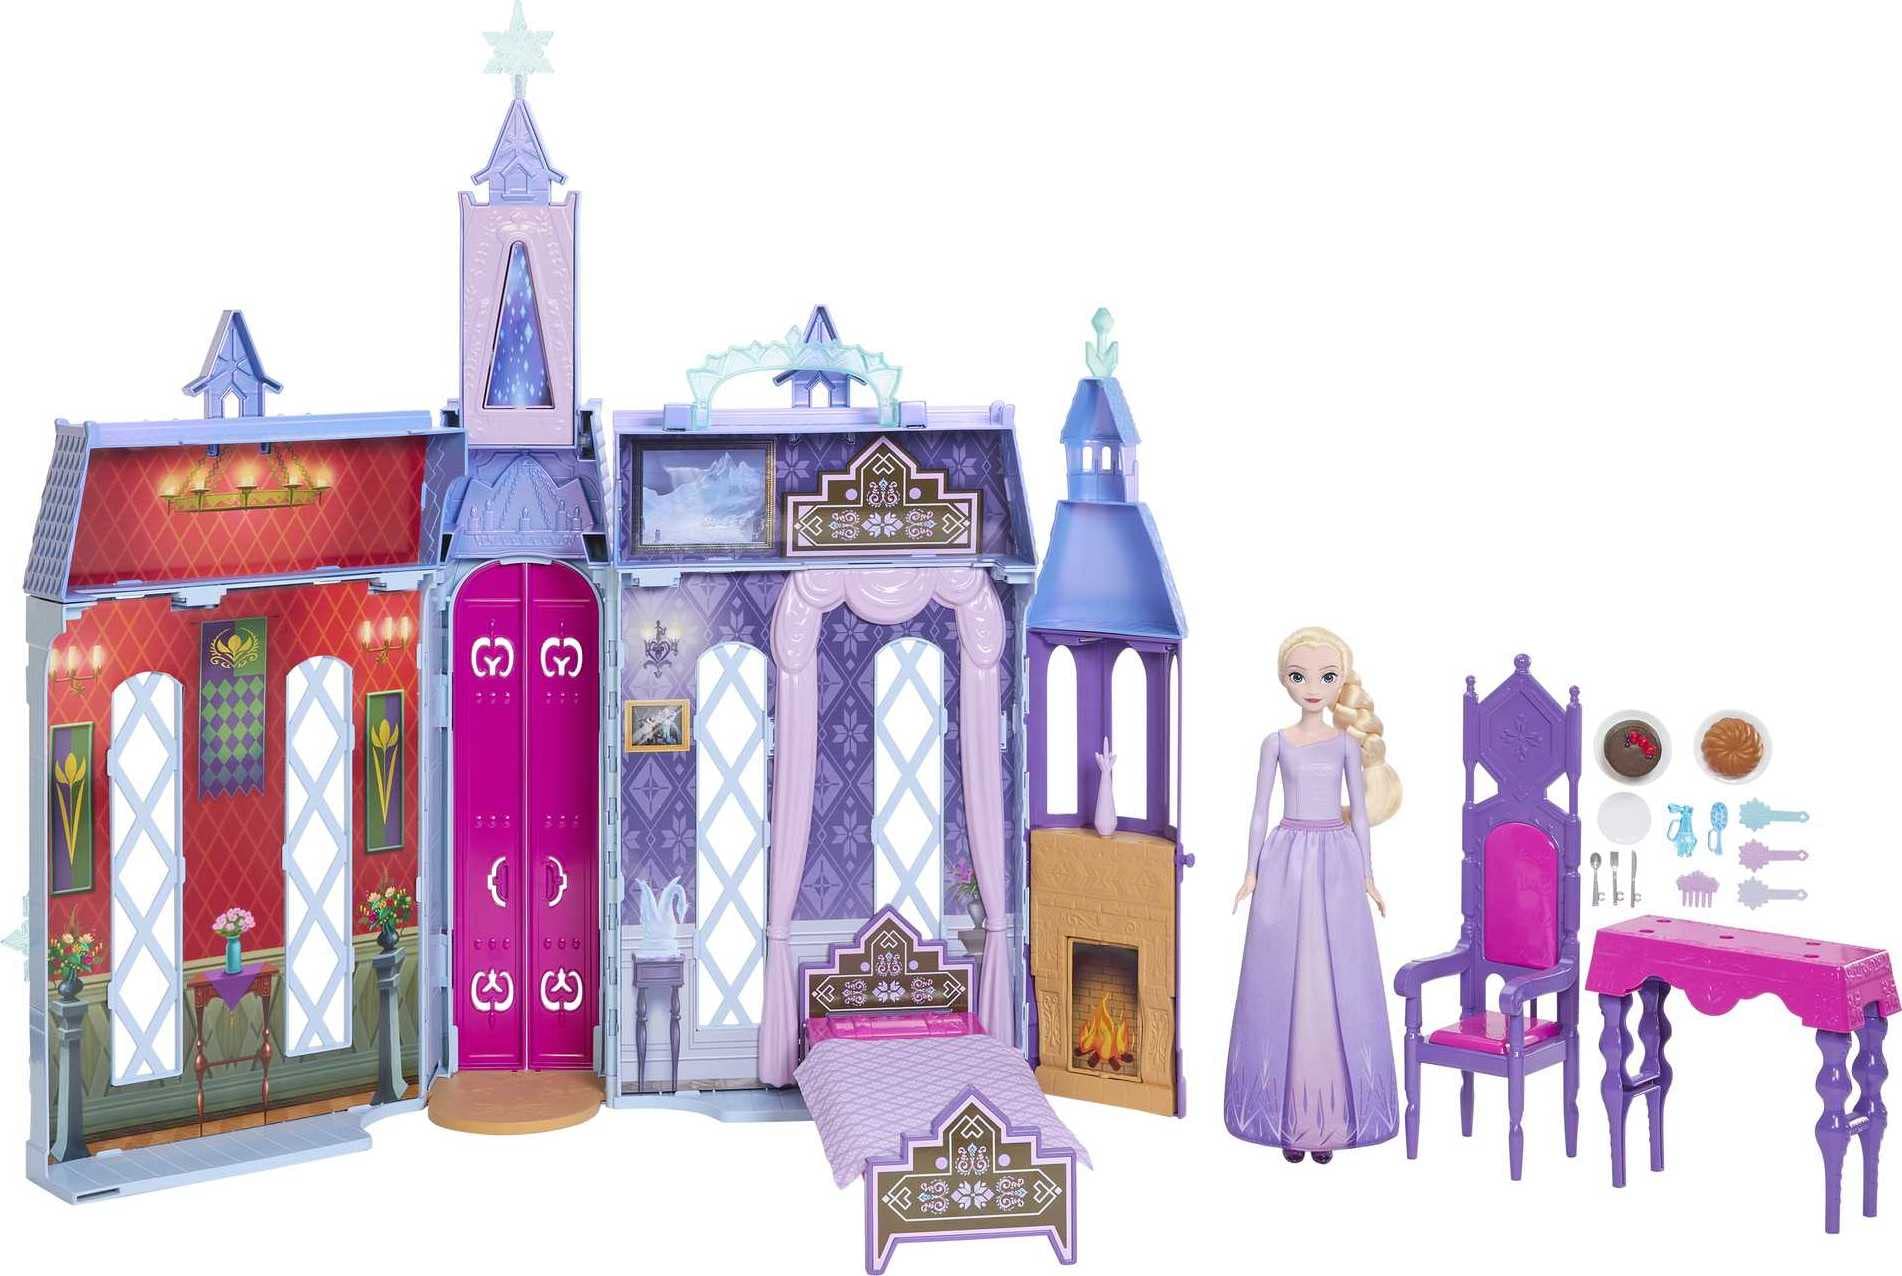 Disney Frozen Arendelle Doll-House Castle (2+ Ft) with Elsa Fashion Doll, 4 Play Areas, and 15 Furniture and Accessory Pieces From Disney's Frozen 2